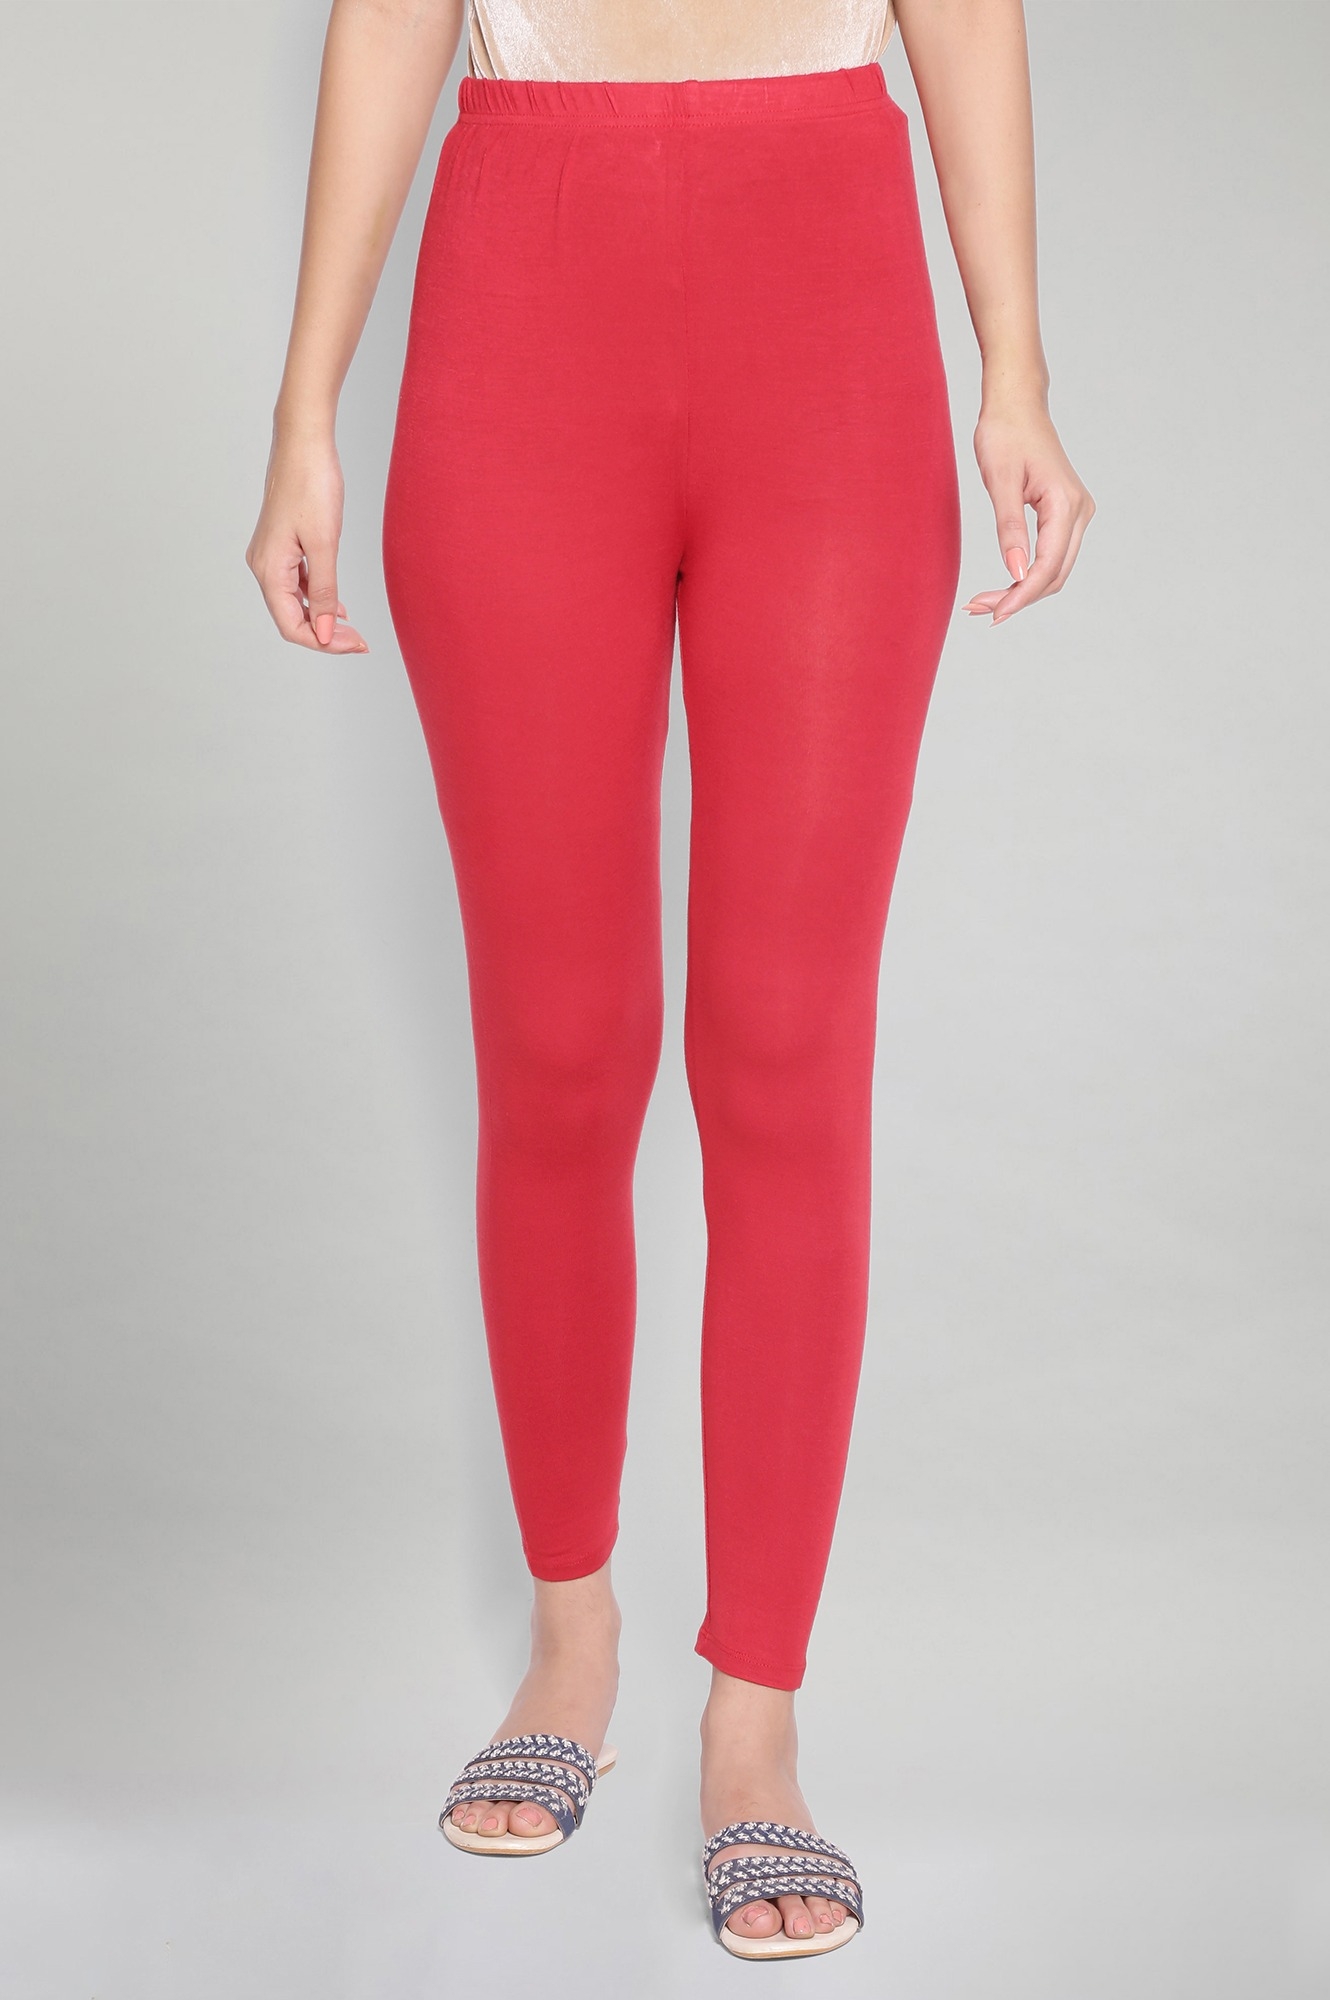 Elleven | Red Solid Tights